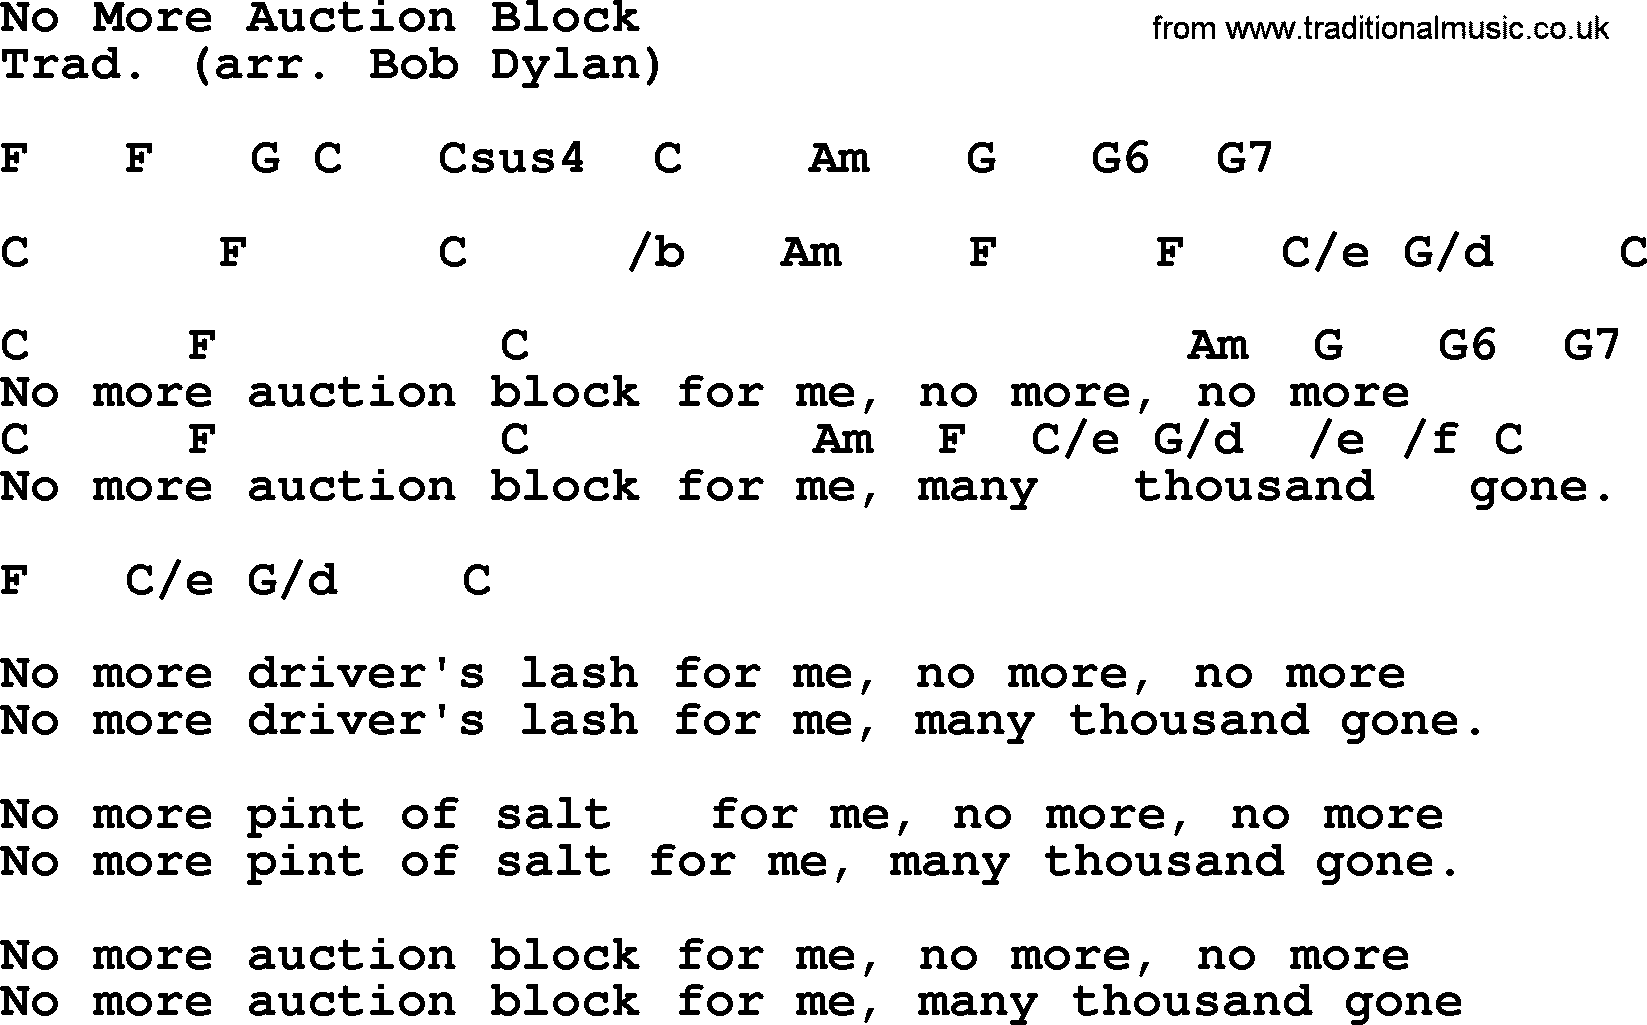 Bob Dylan song, lyrics with chords - No More Auction Block